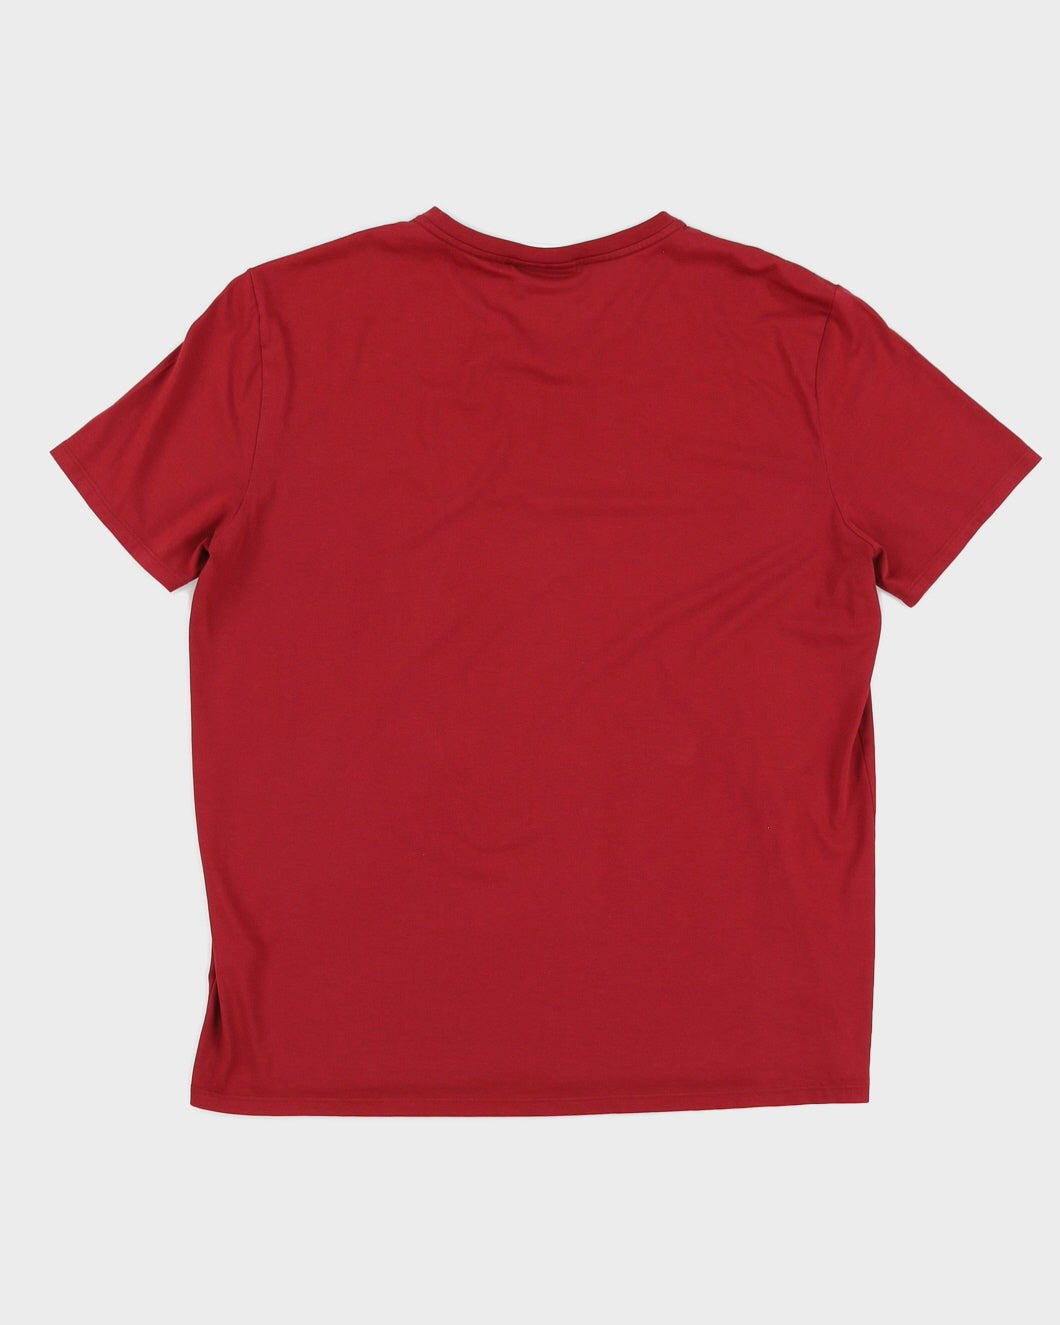 Red Lacoste Logo T-shirt - XL